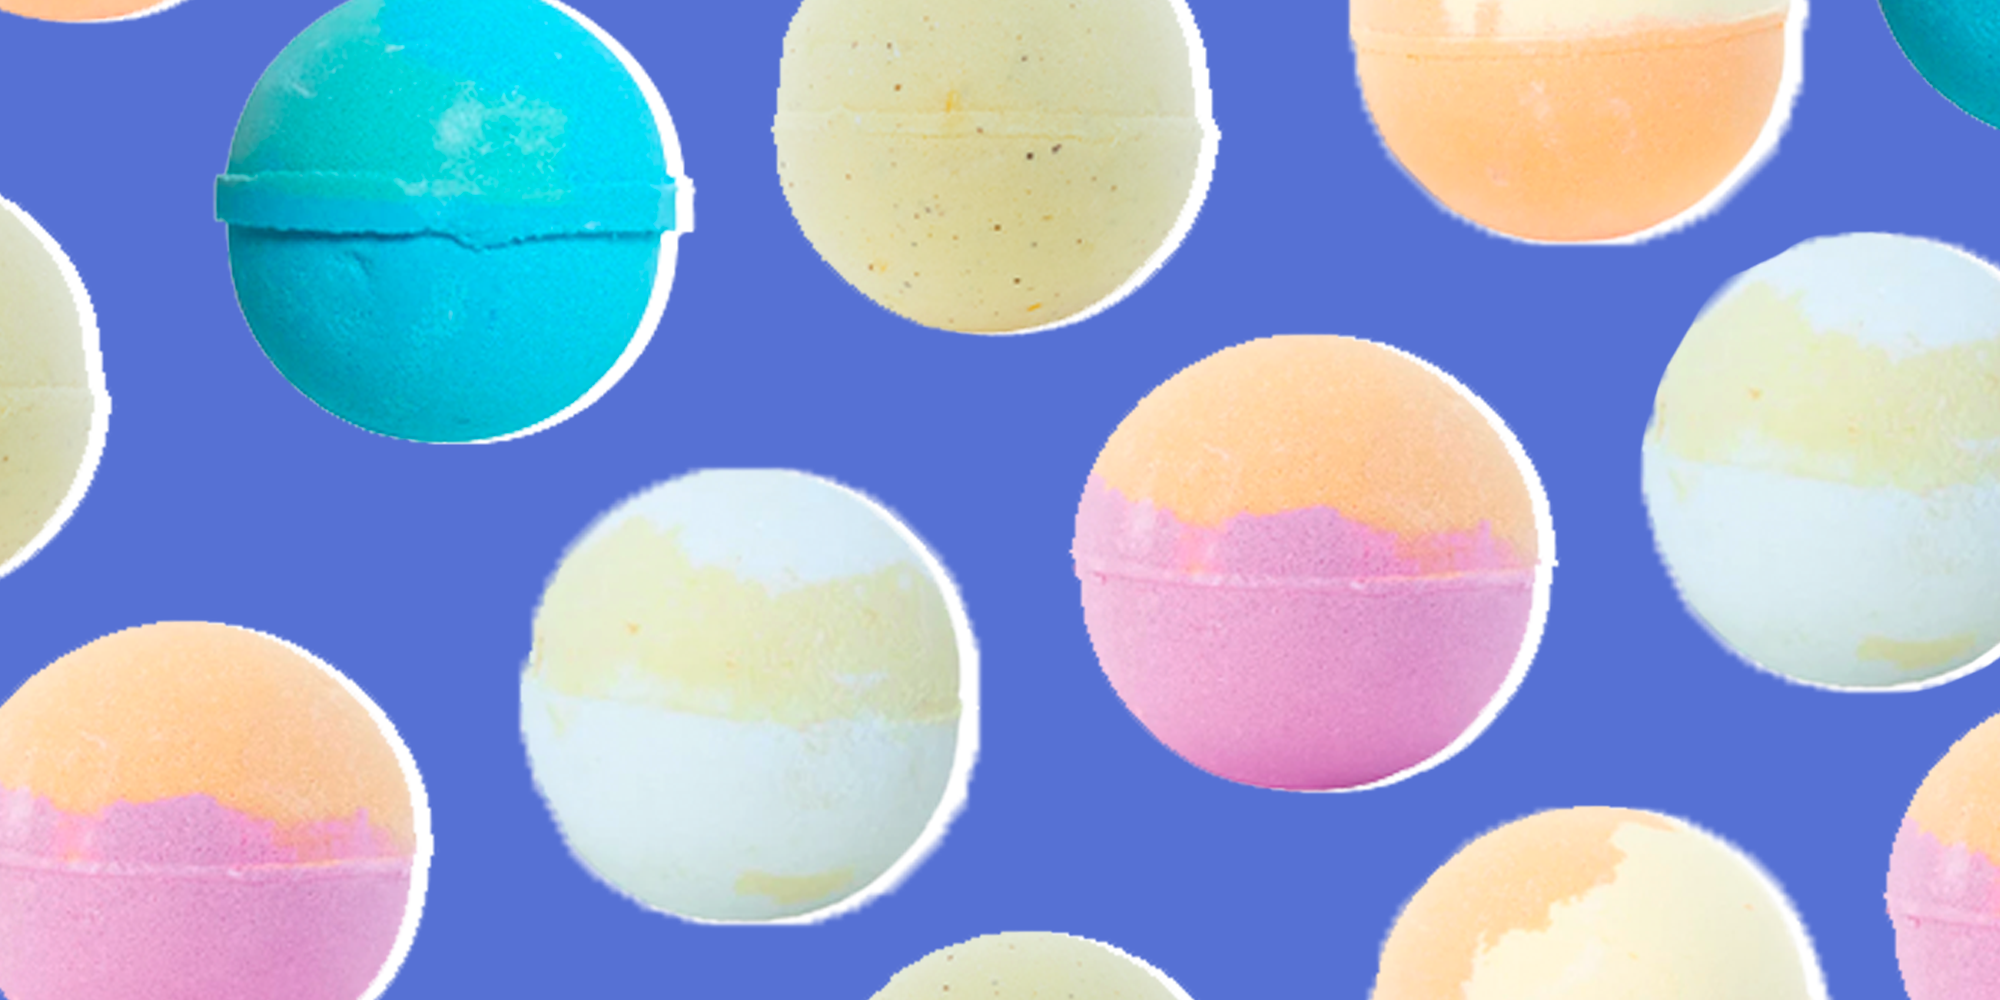 where to purchase bath bombs